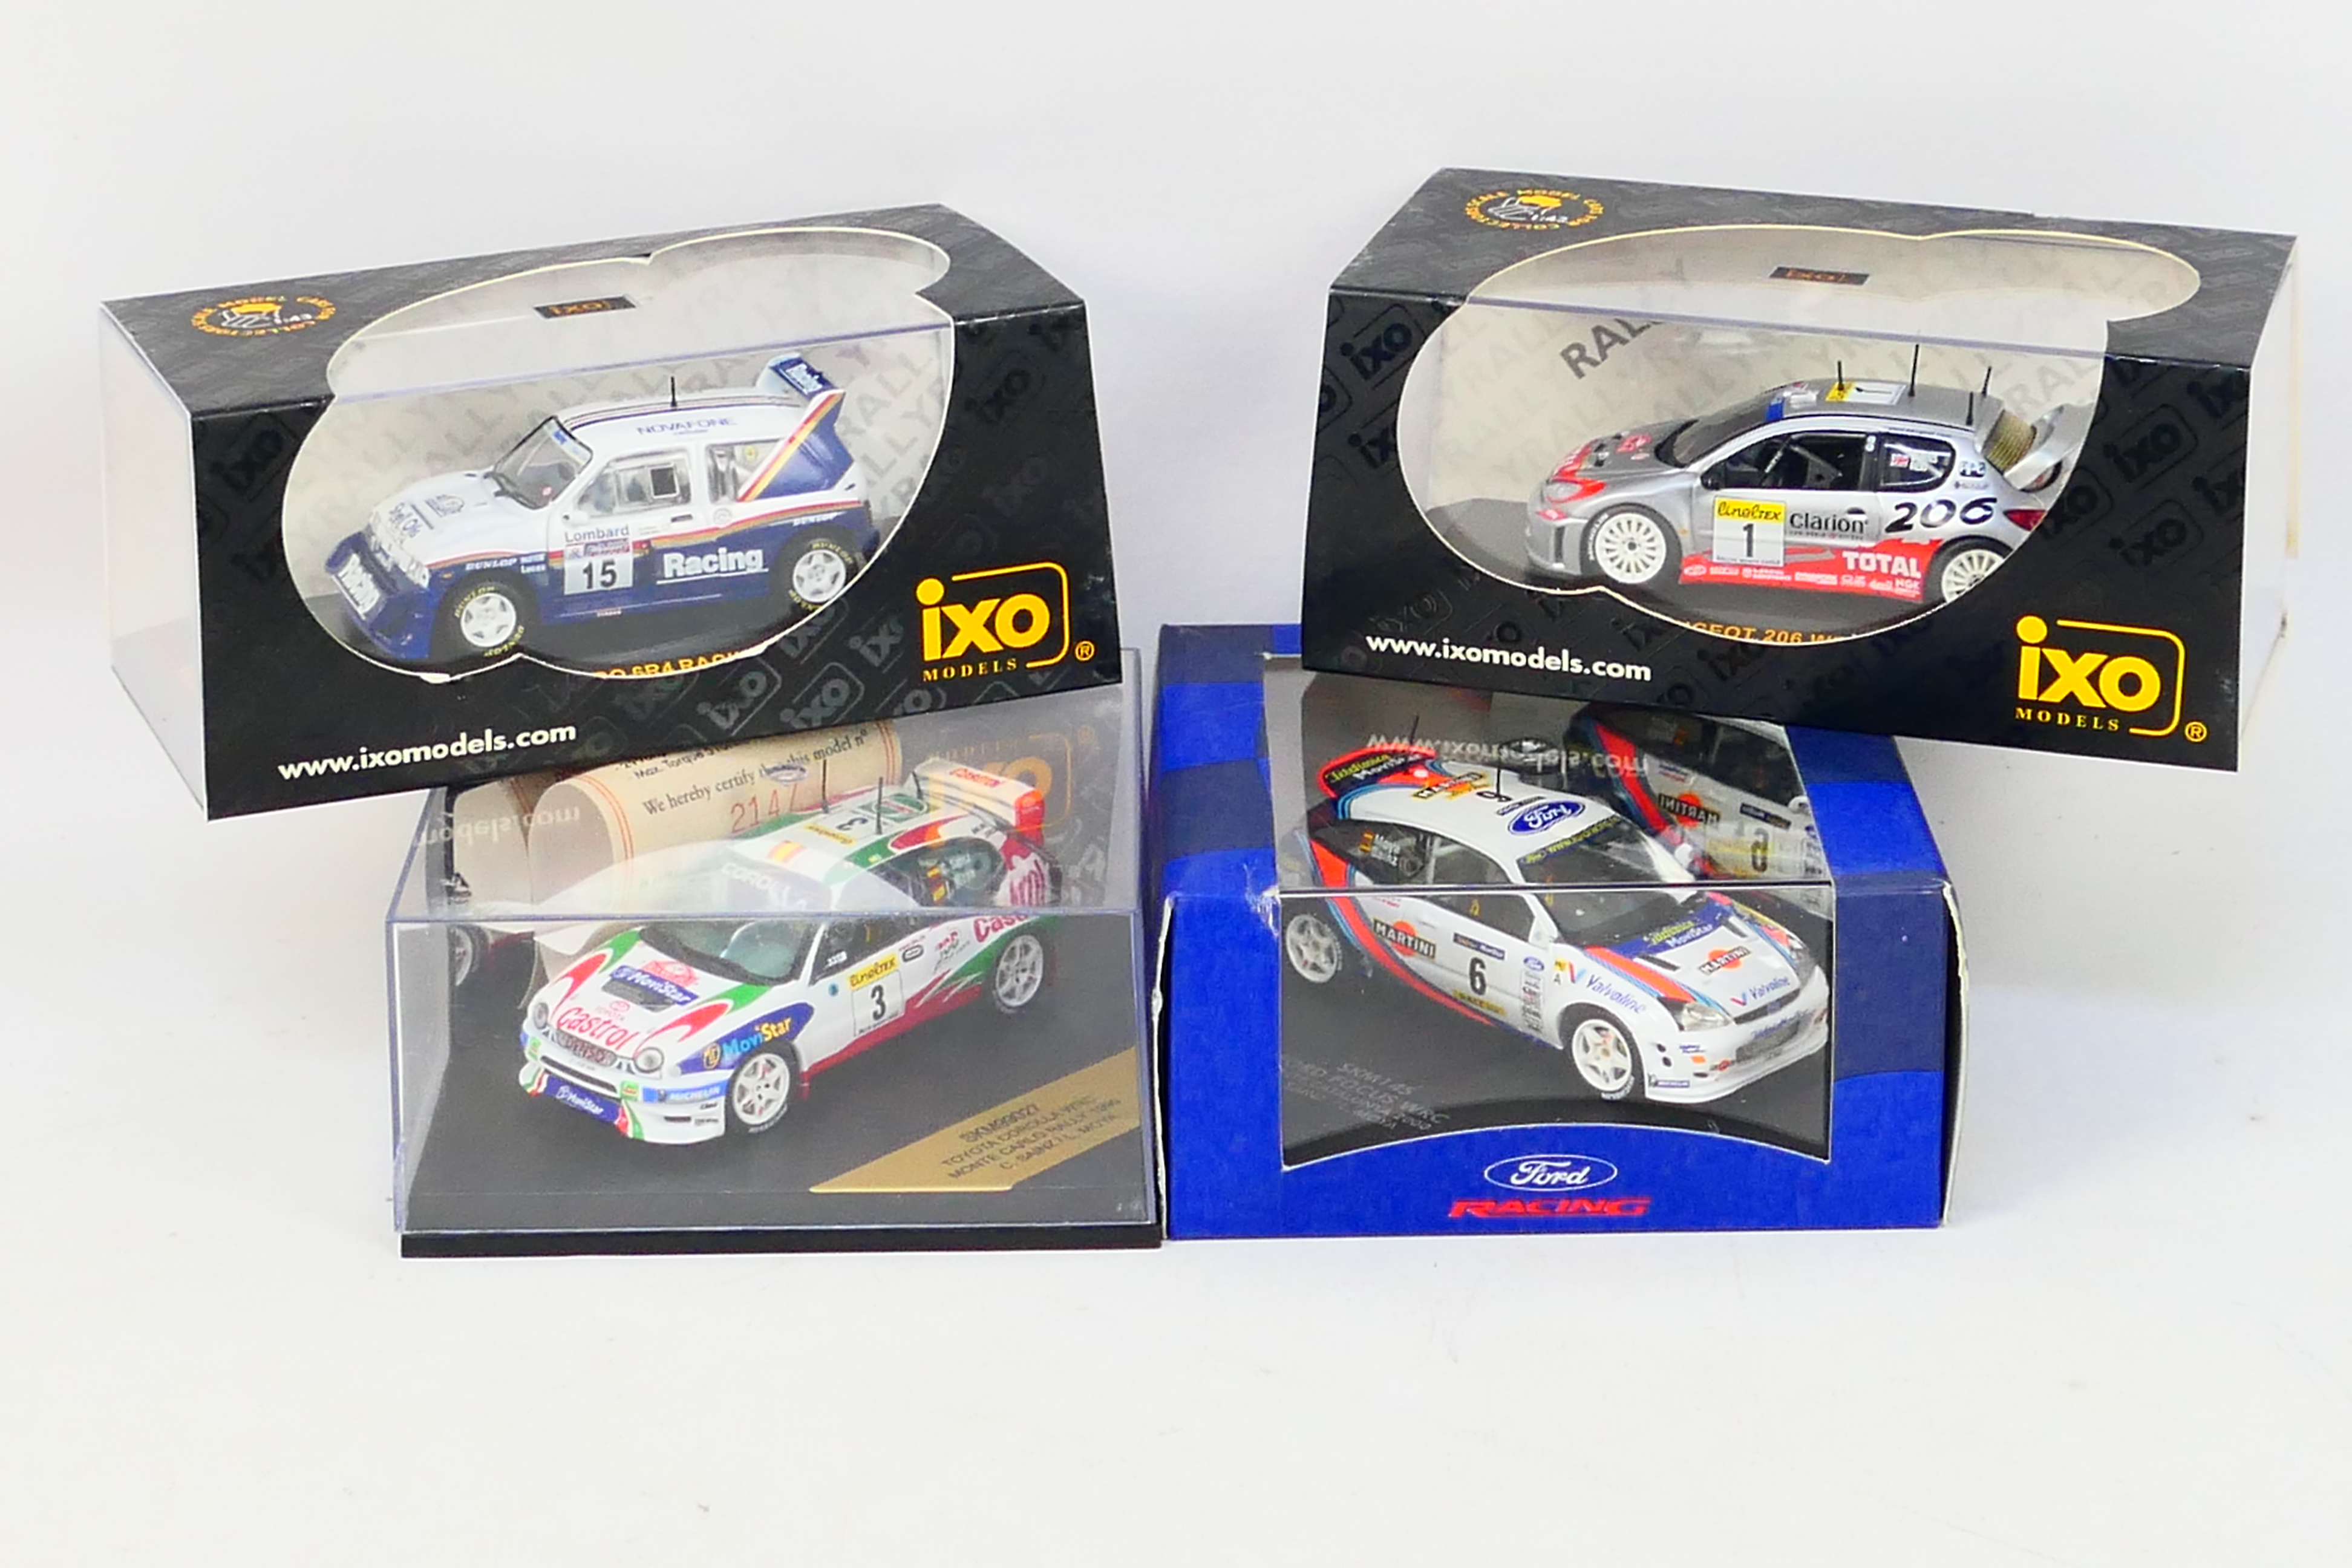 IXO Models - Vittese - Four boxed 1:43 scale diecast model rally cars.